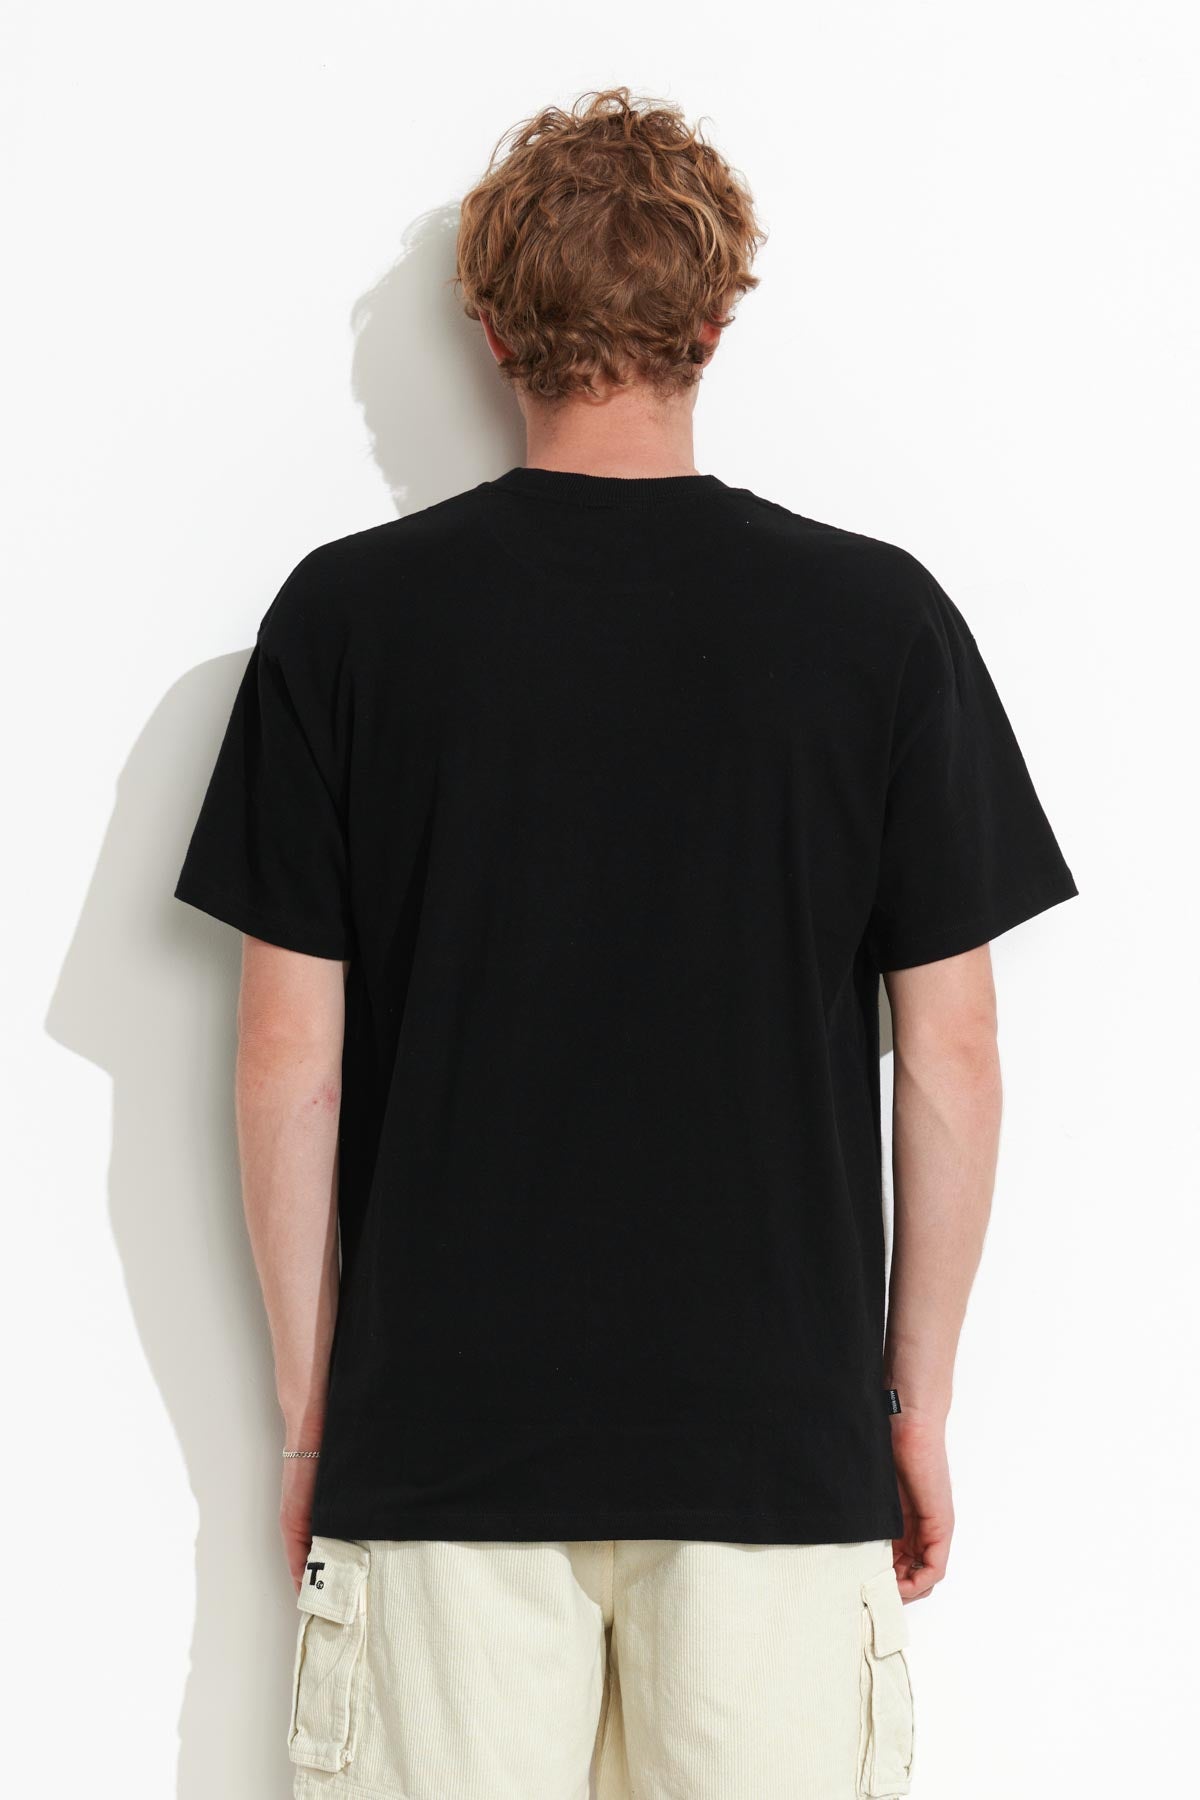 Misfit Shapes - Gone Moody 50-50 Aaa SS Tee - Washed Black